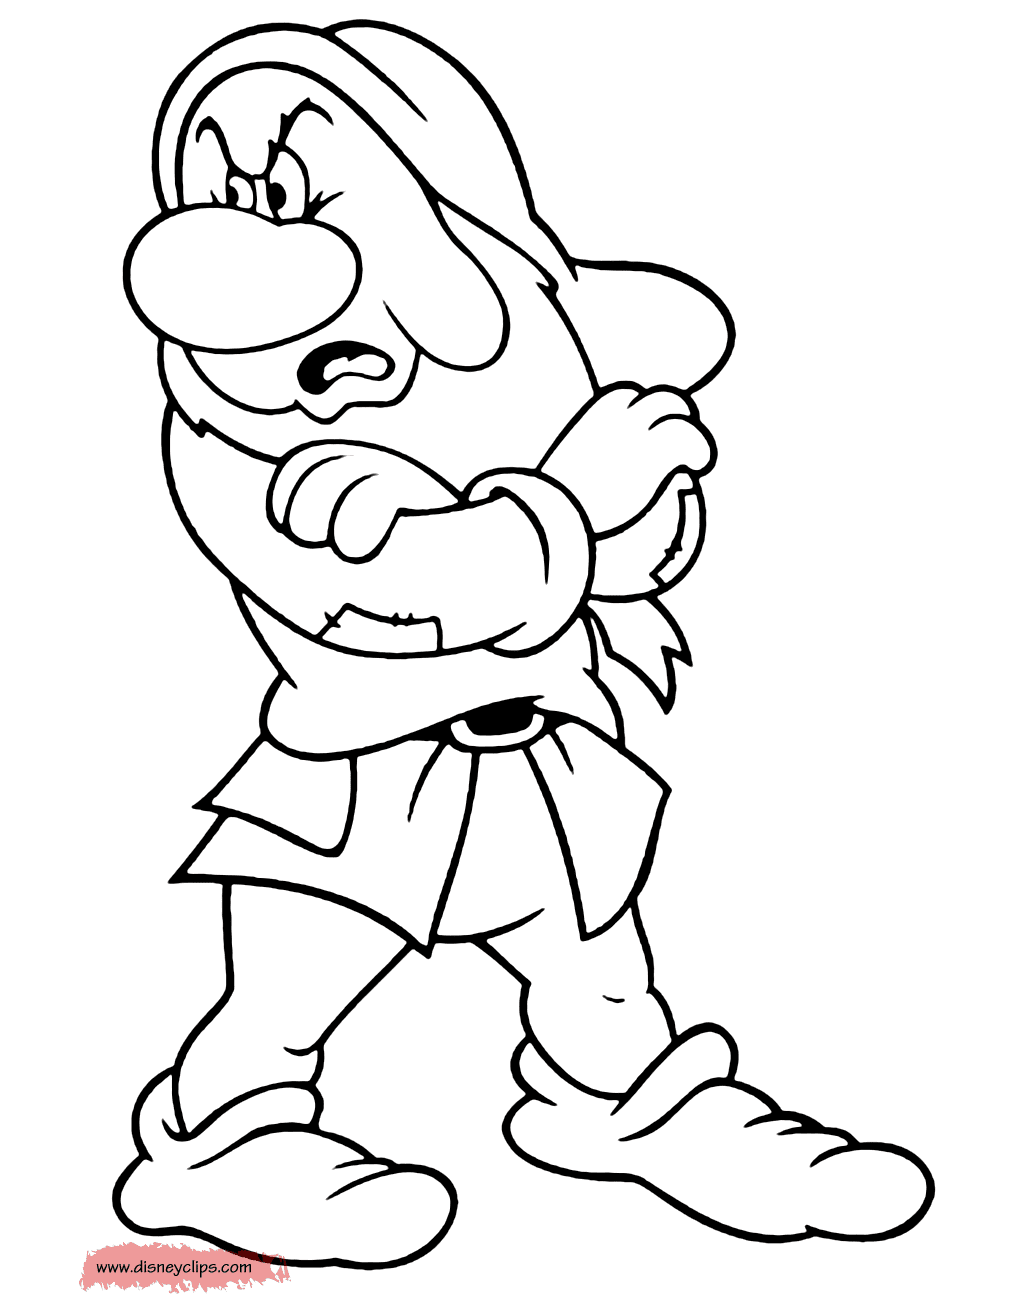 Grumpy standing with crossed arms Coloring Pages